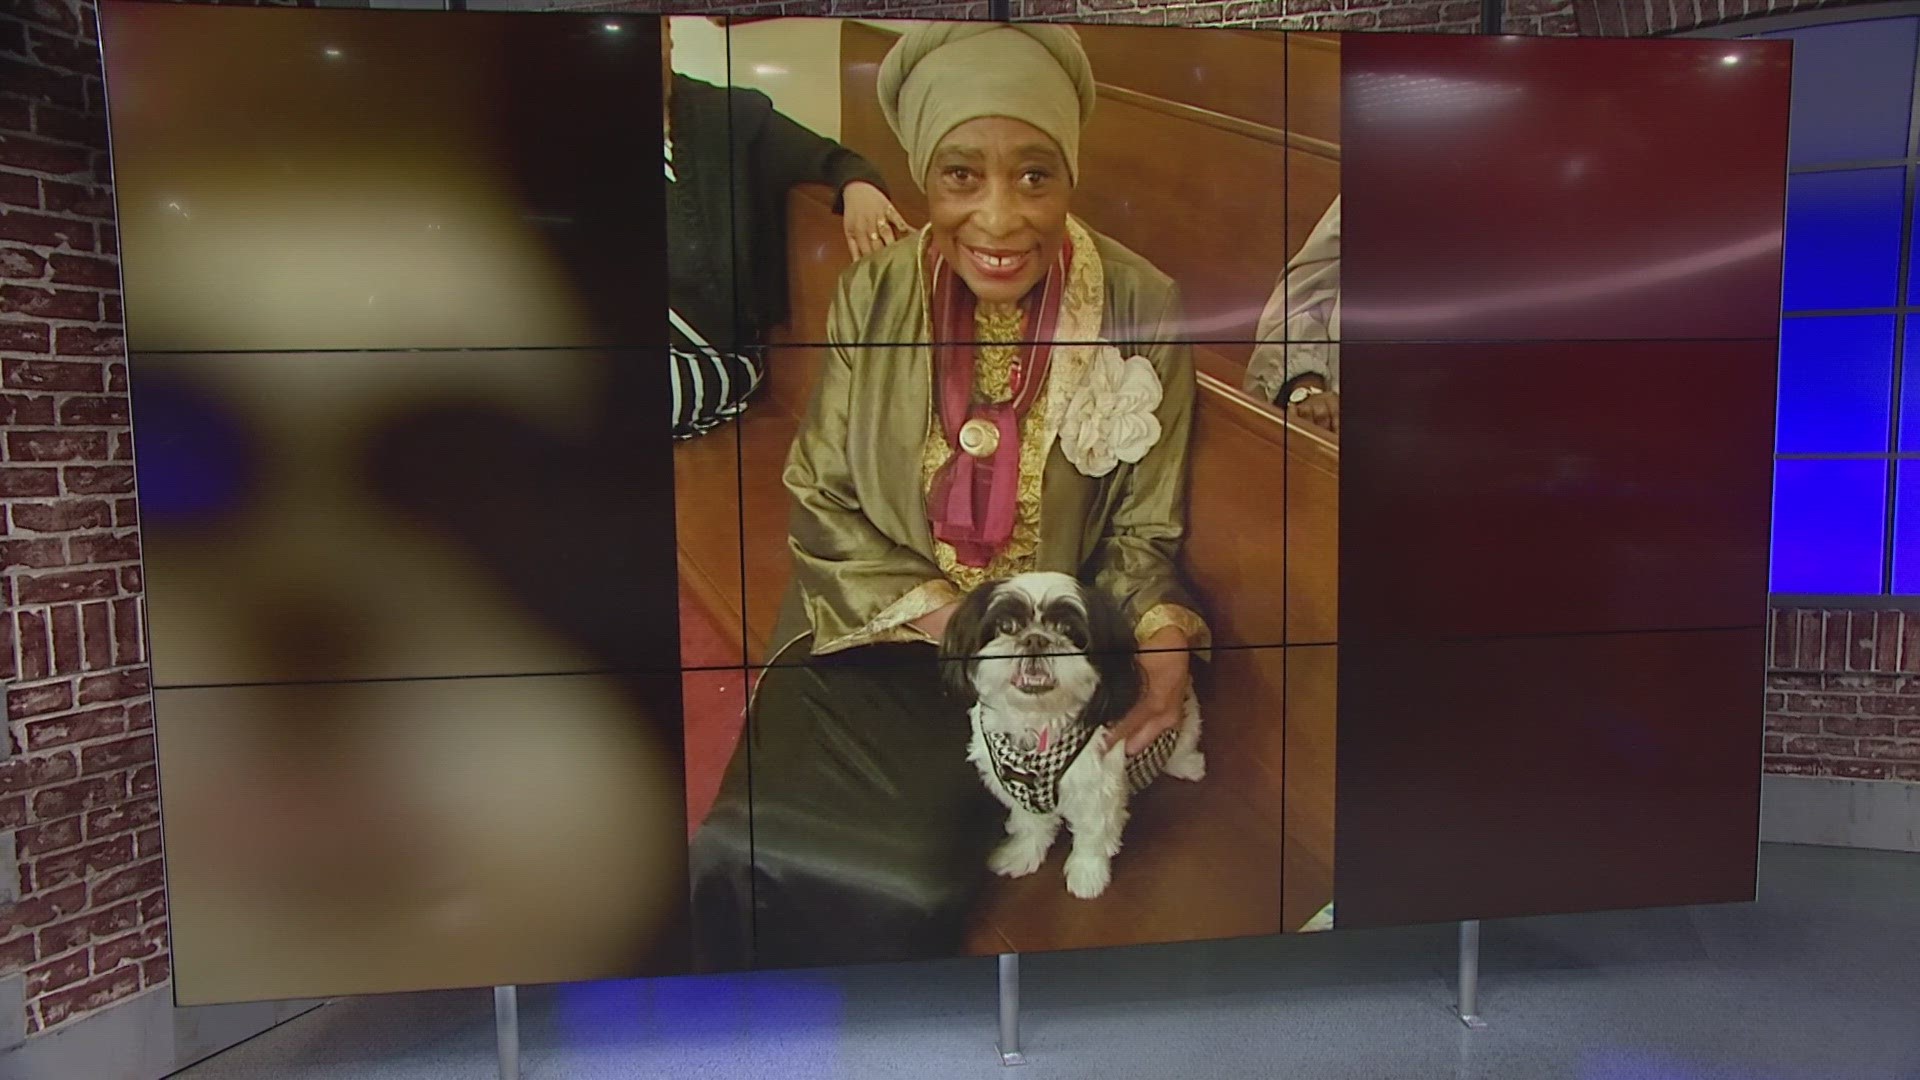 Police are asking for the public's help finding a missing 75-year-old Kensington woman.